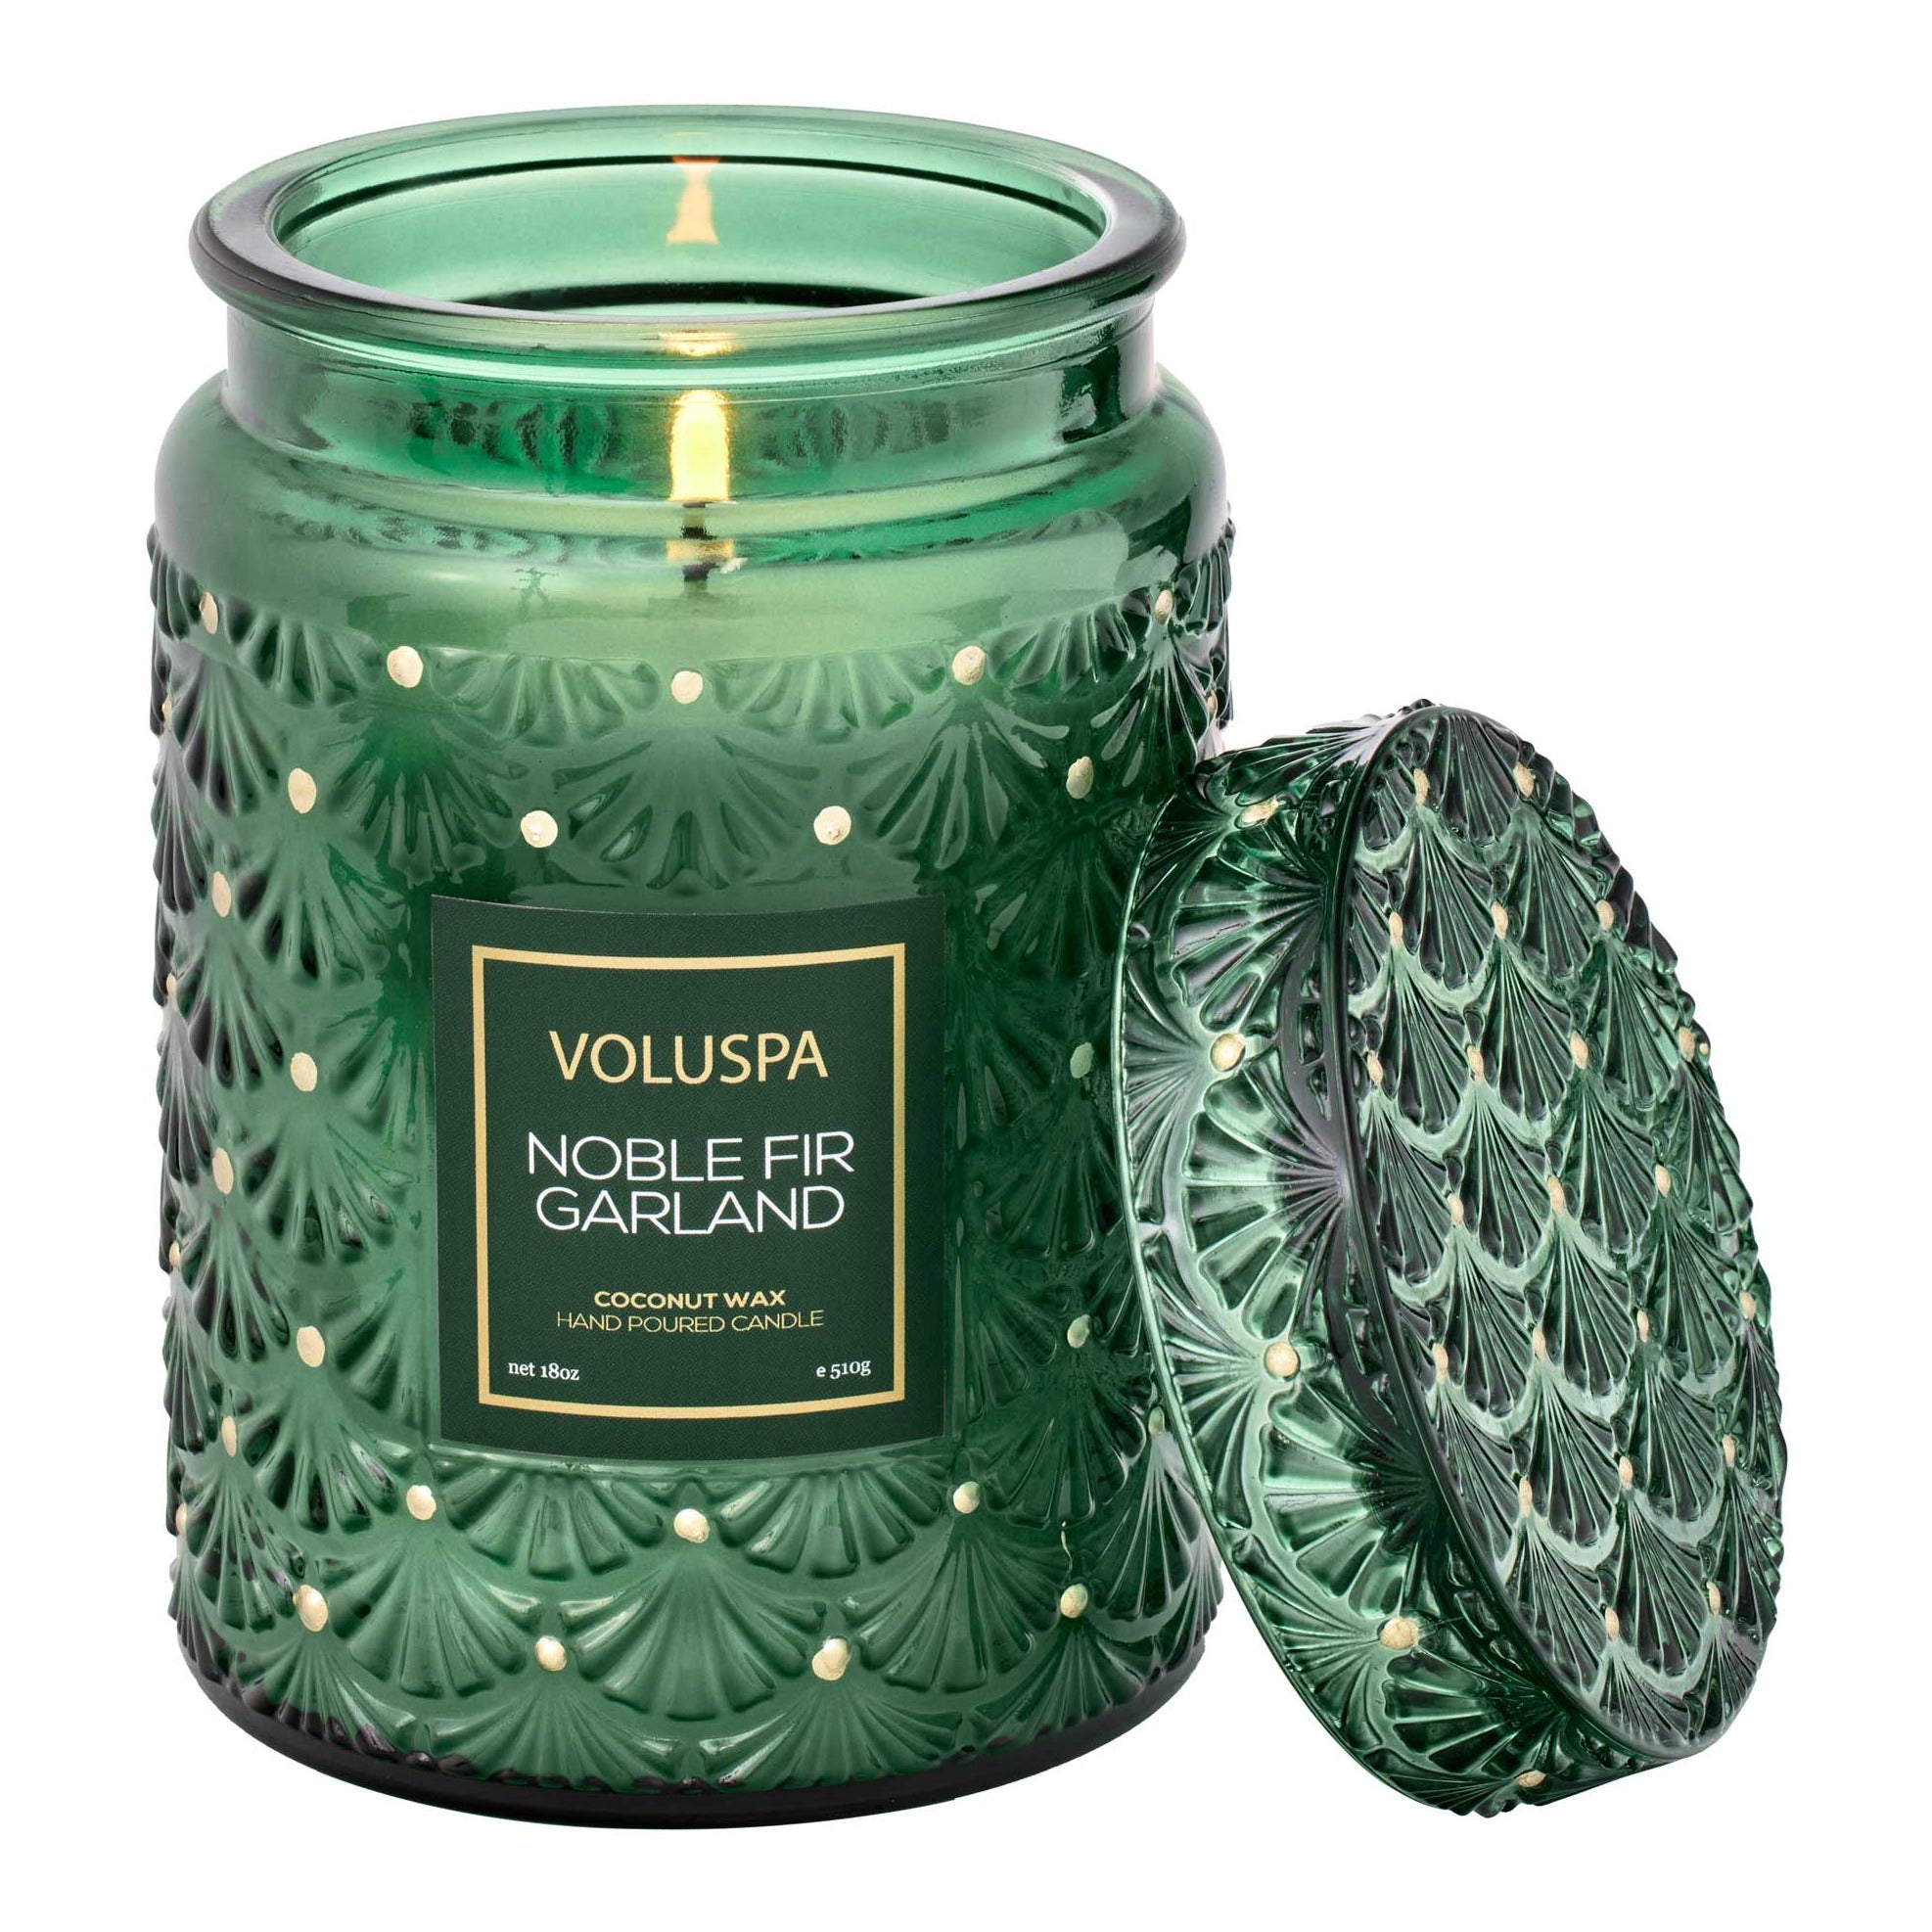 Green glass candle with lid to the side